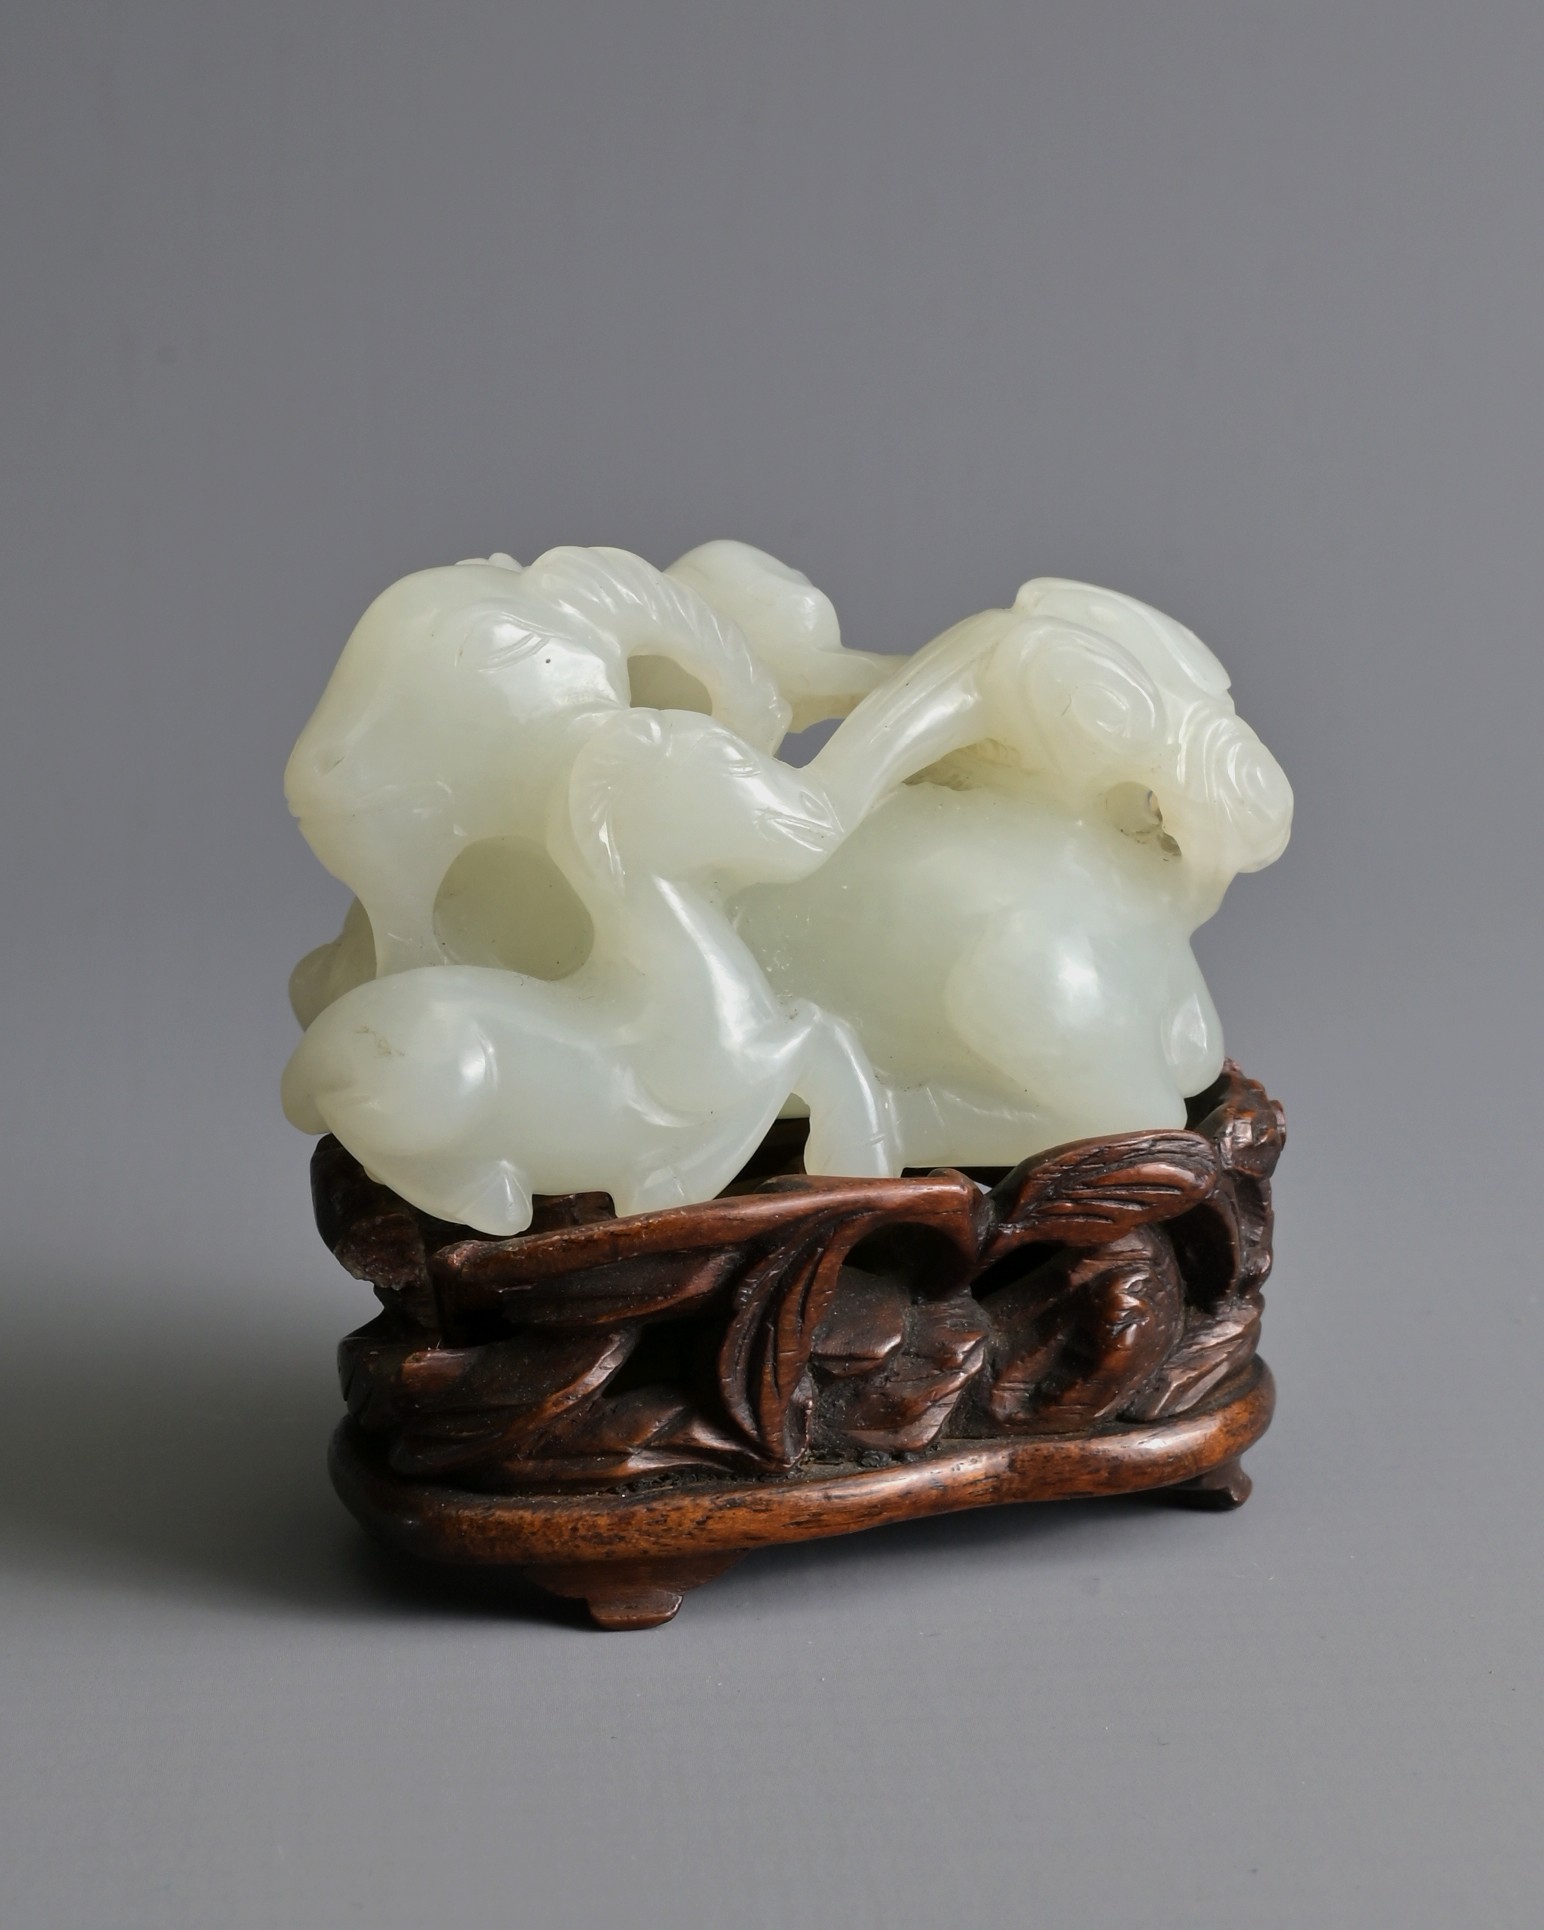 A CHINESE WHITE JADE DEER GROUP ON WOODEN STAND, 19/20TH CENTURY. Carved and pierced in the form